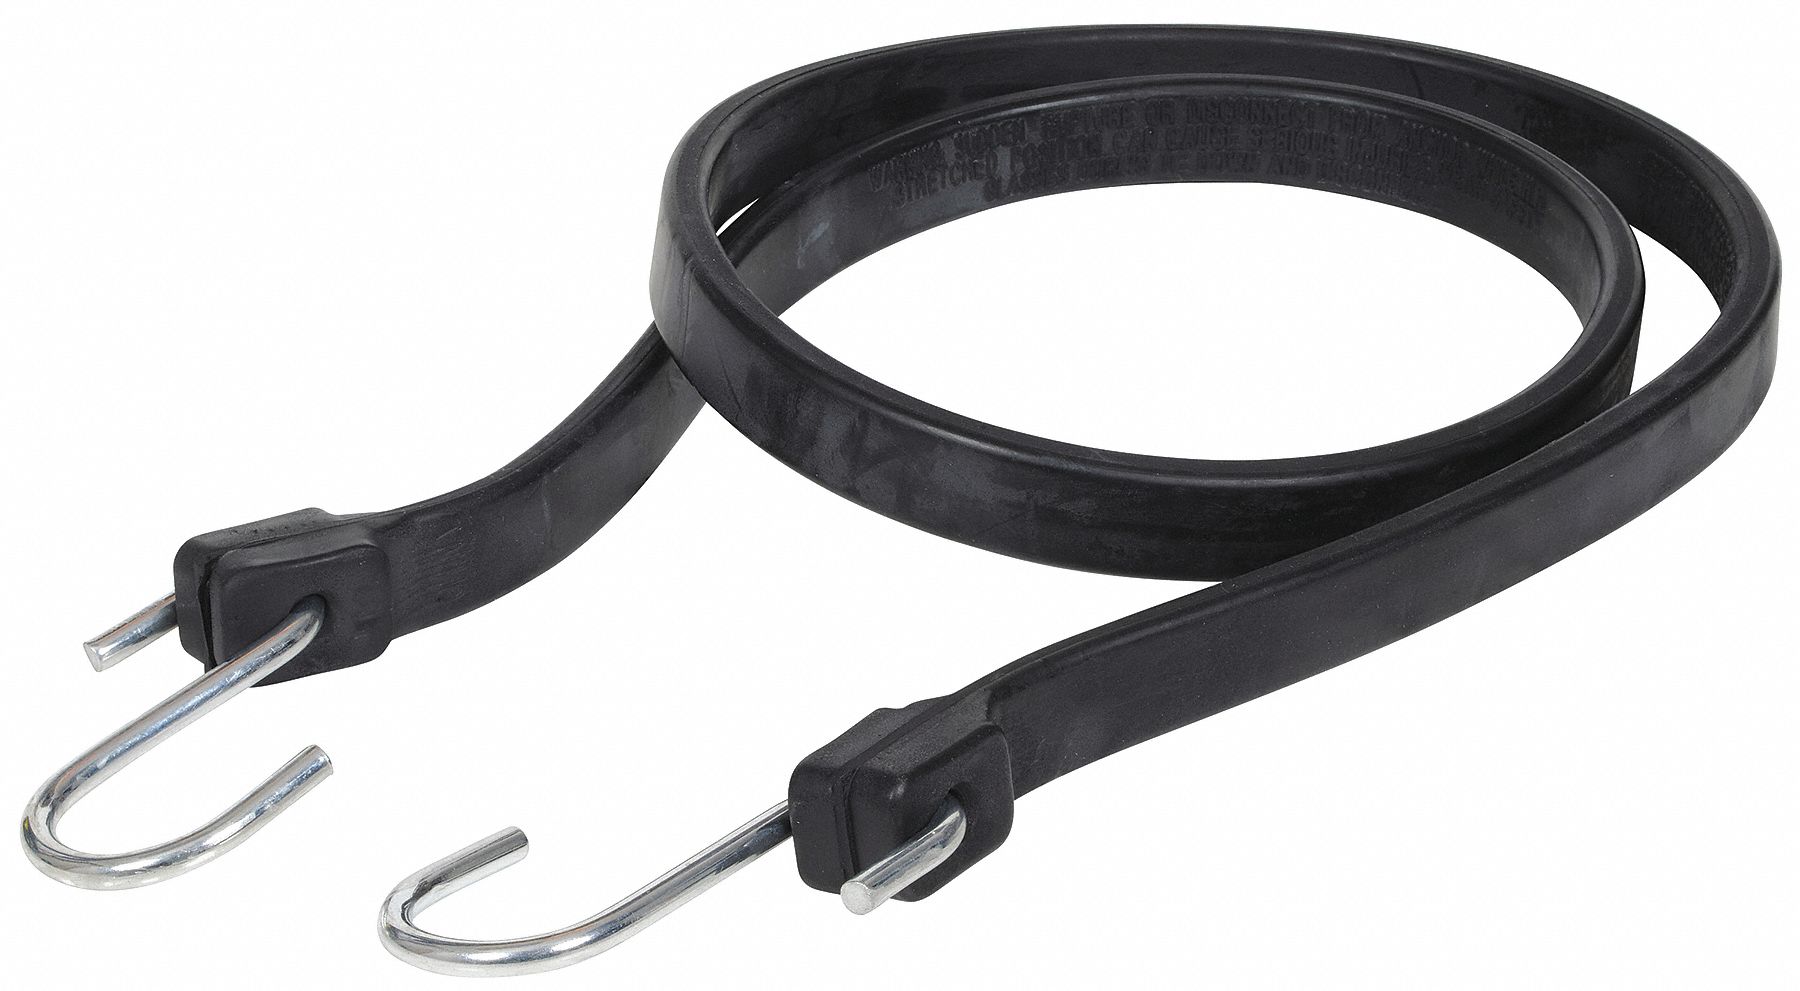 Bungee Strap, Epdm Rubber, Black, S-Hook End Type, 45 Inch Bungee Length